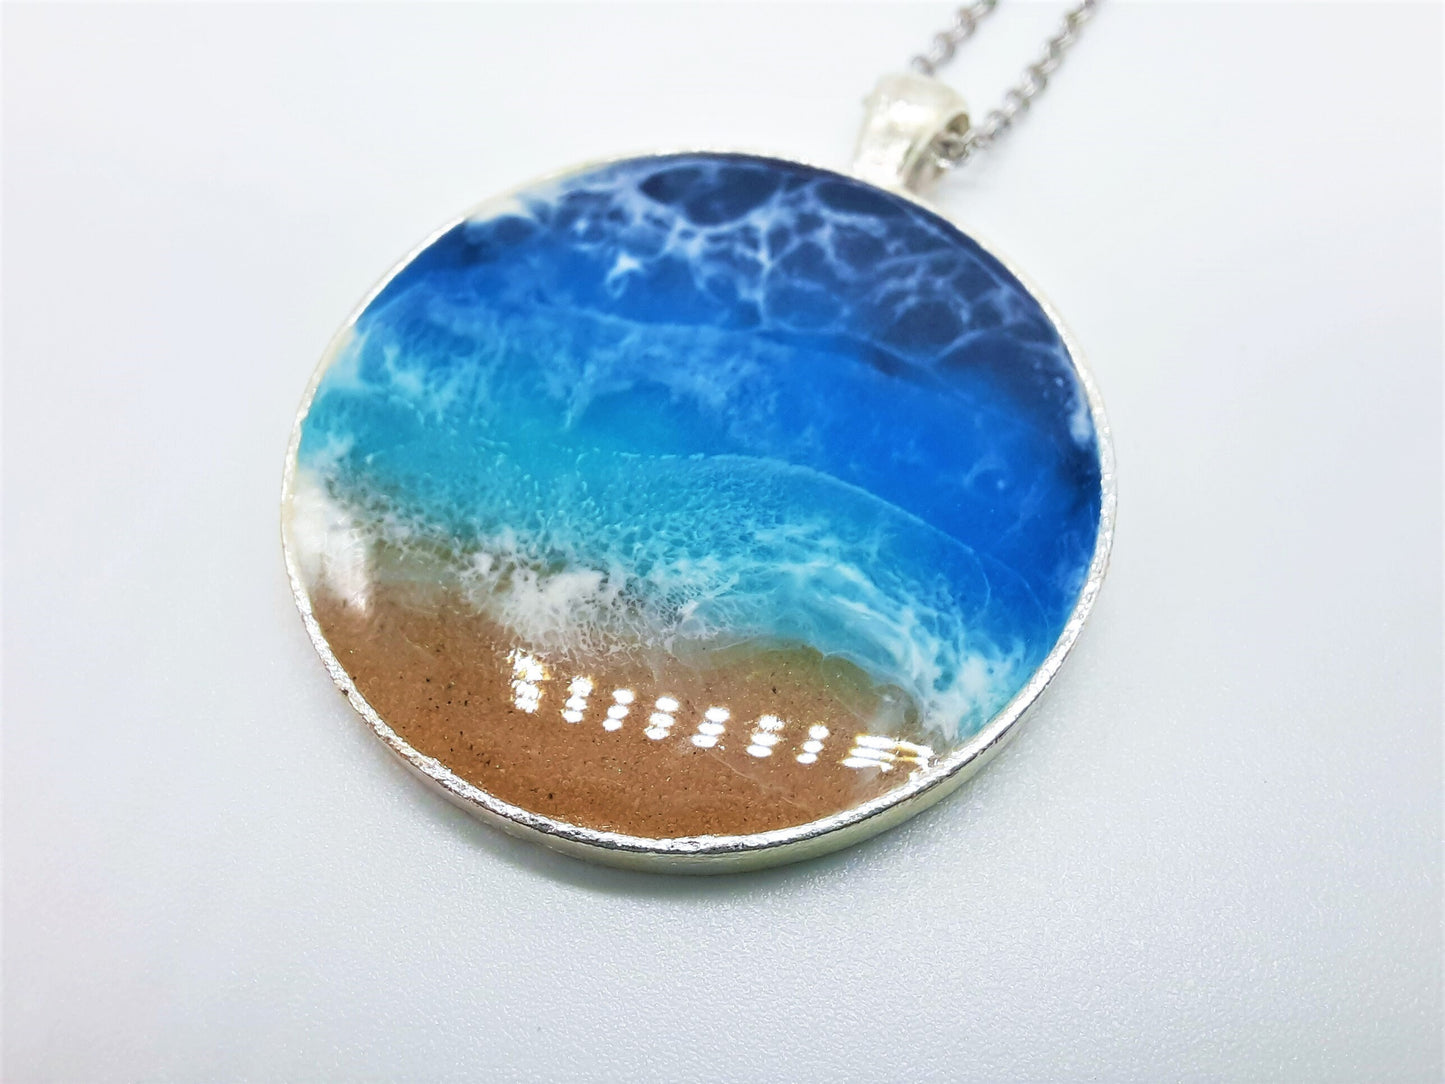 Resin Waves Extra Large Round Shaped Ocean Pendant / Beach Scene Necklace, Handmade w/ Resin & Real Sand - One of a Kind - Not a Photograph!